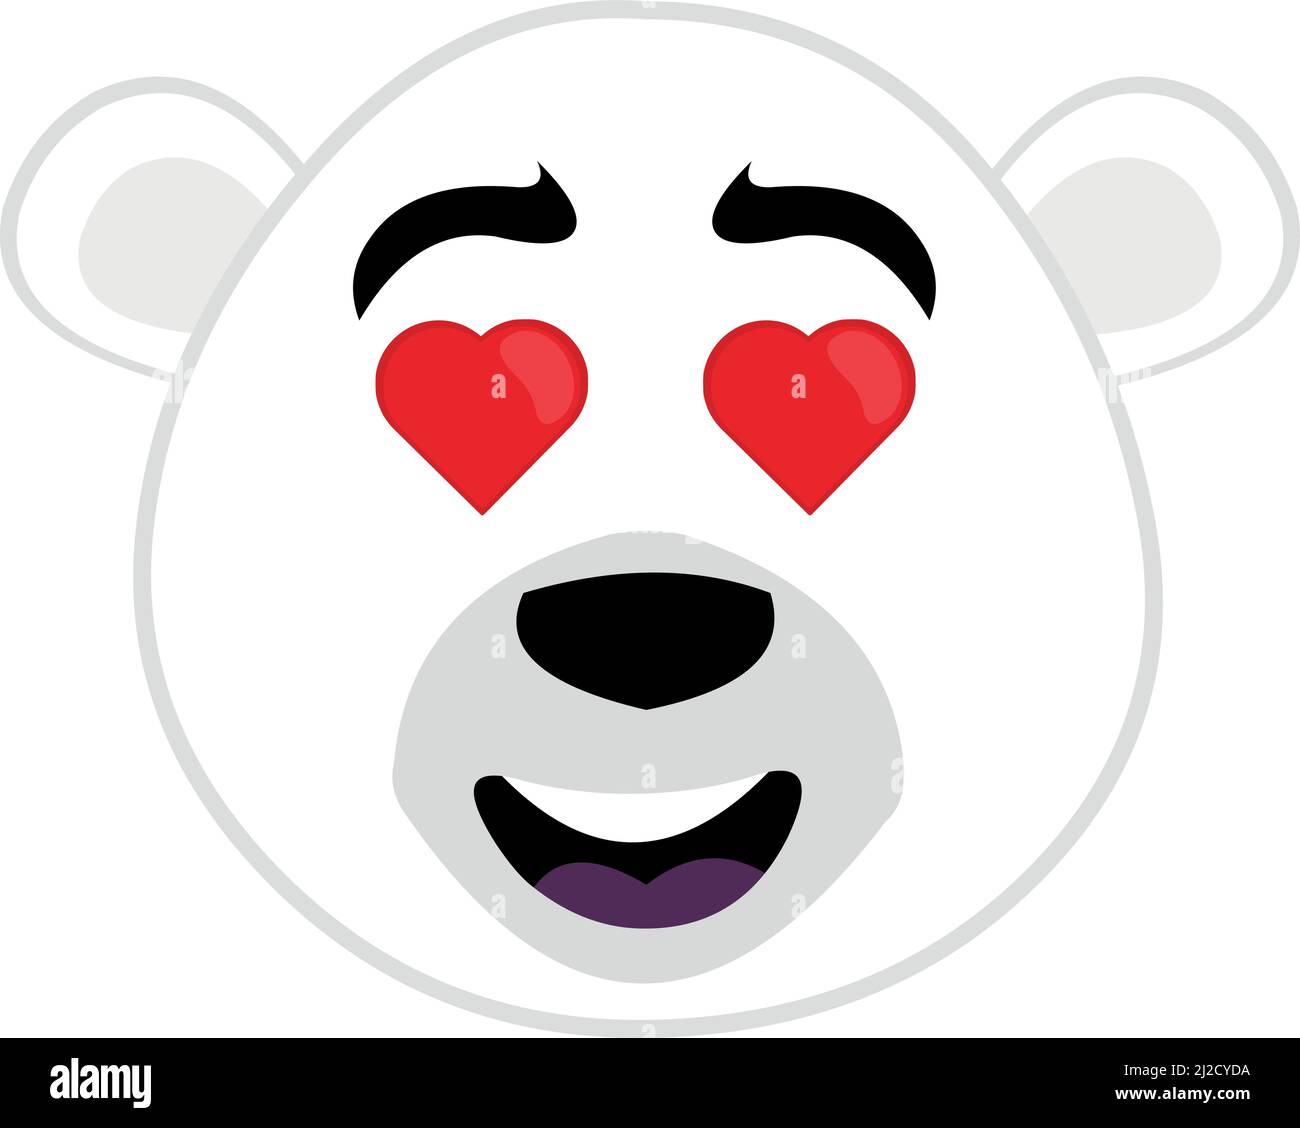 Vector illustration of the face of a cartoon polar bear with eyes in the shape of hearts Stock Vector